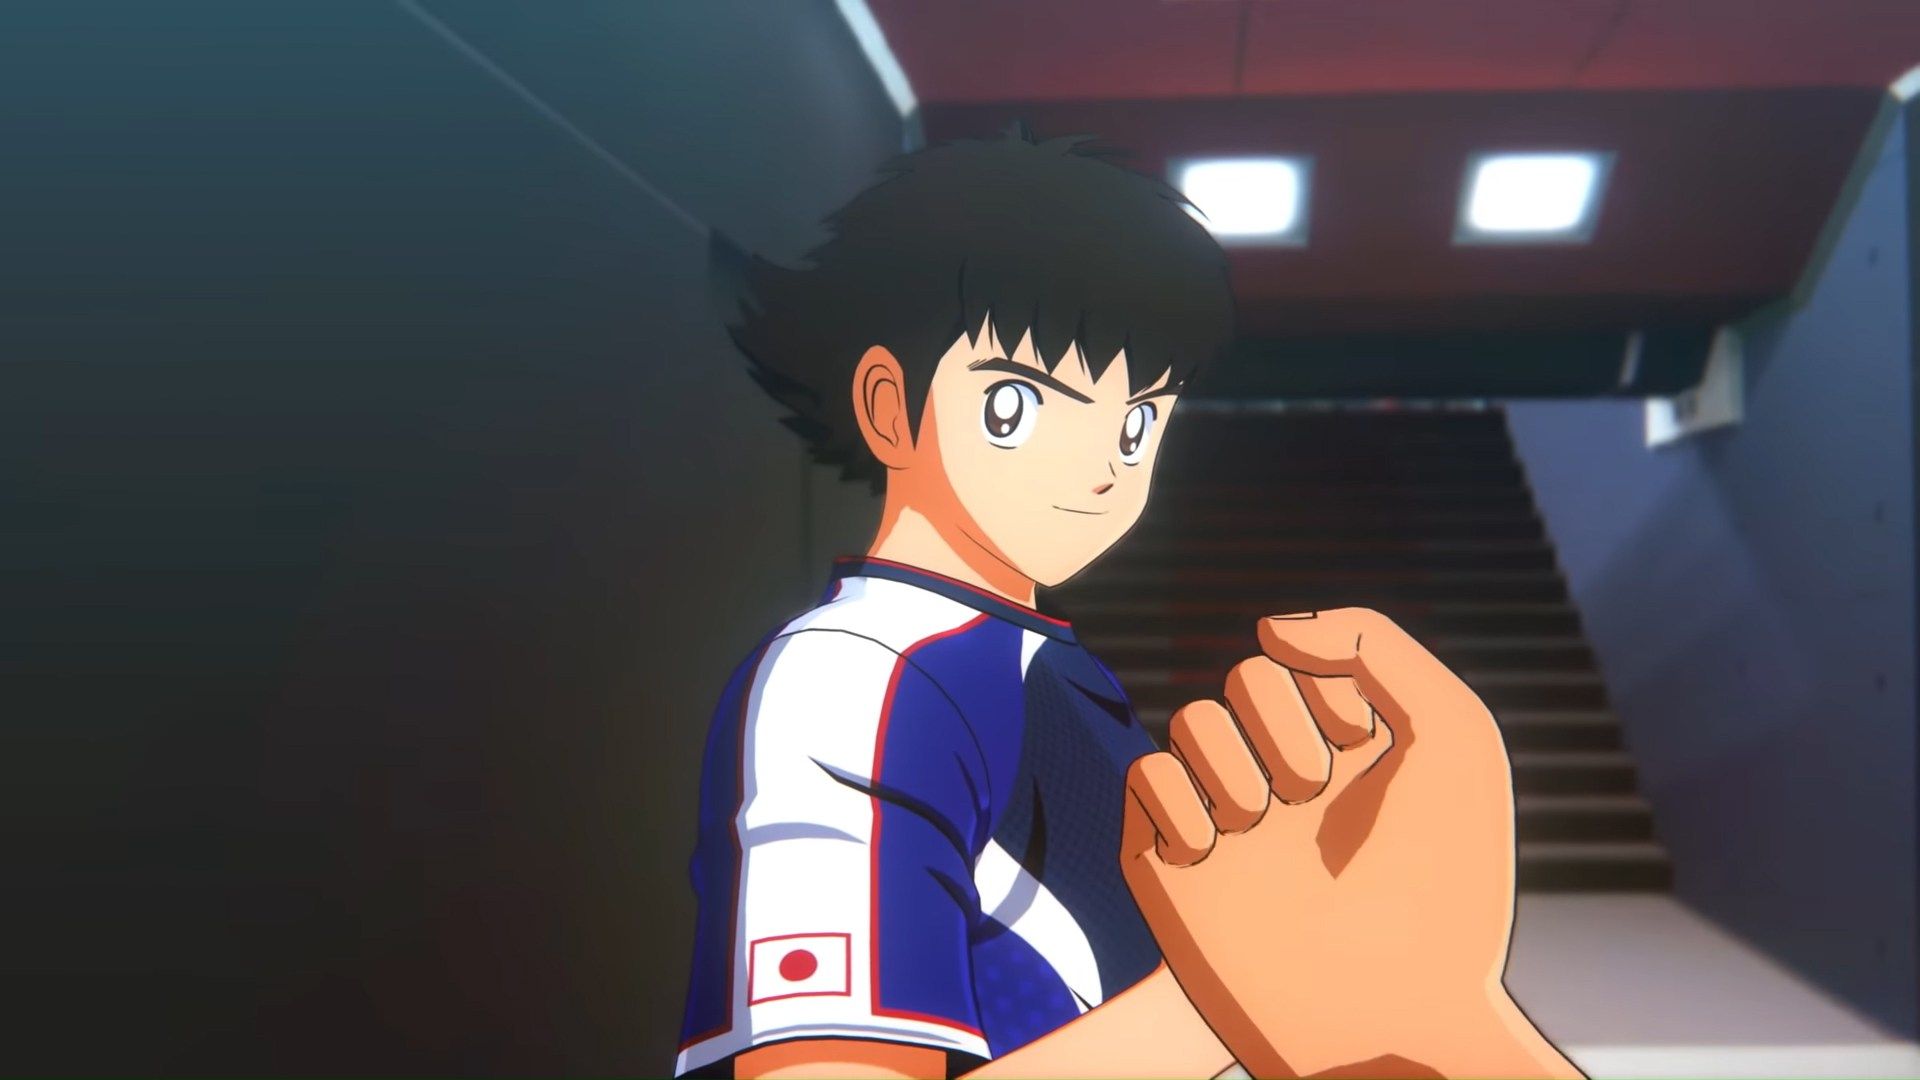 Captain Tsubasa: Rise of New Champions releases a new trailer